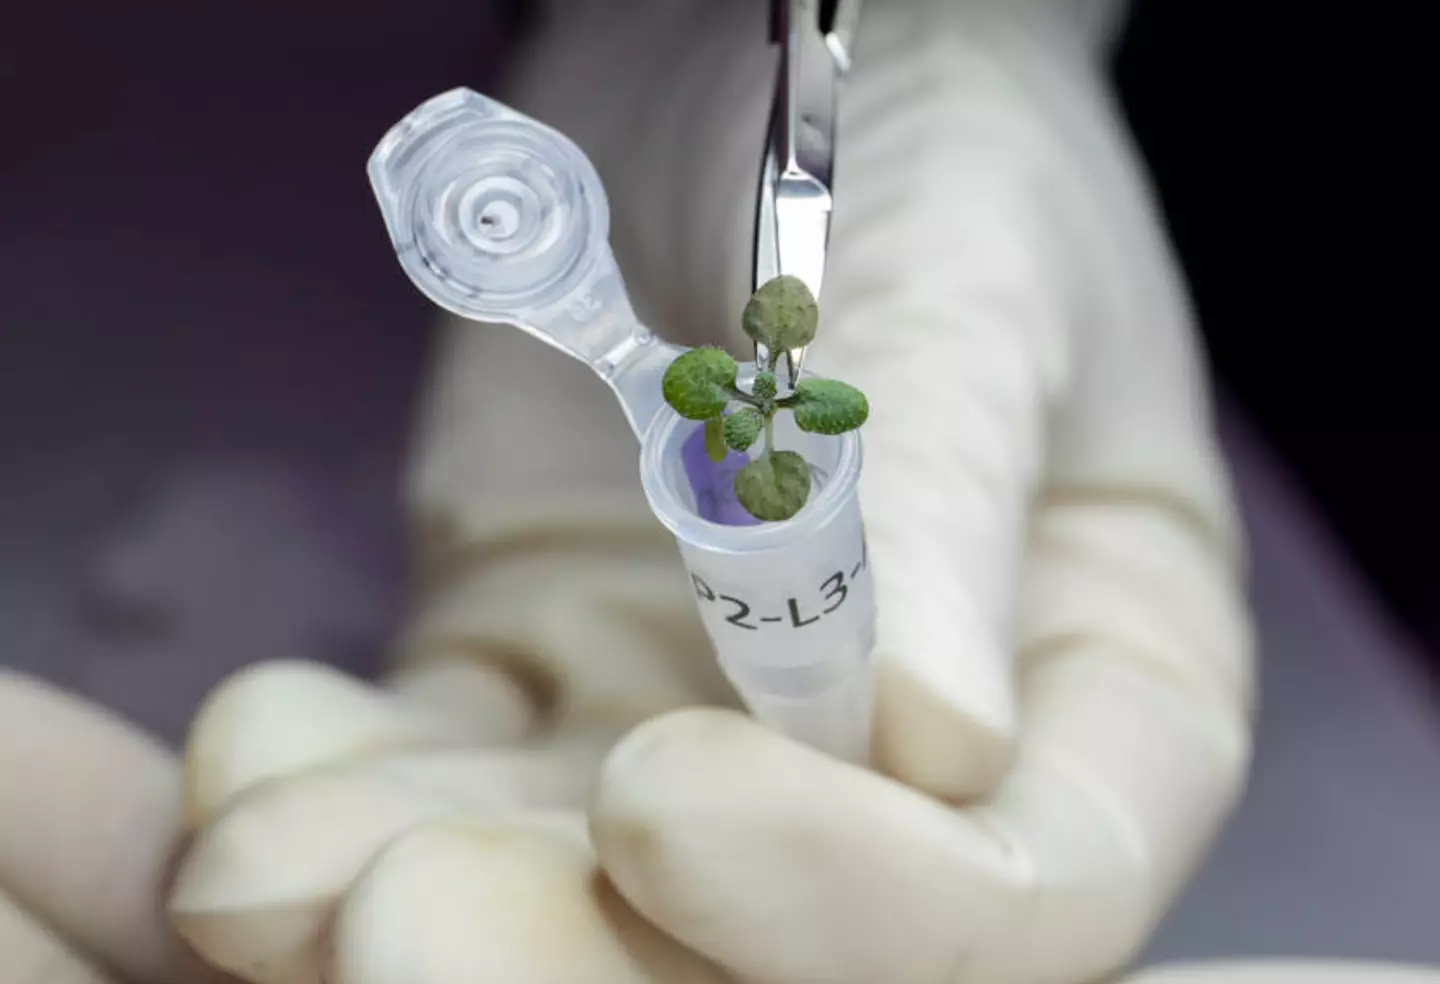 Scientists have grown plants in soil collected from the moon for the first time ever.